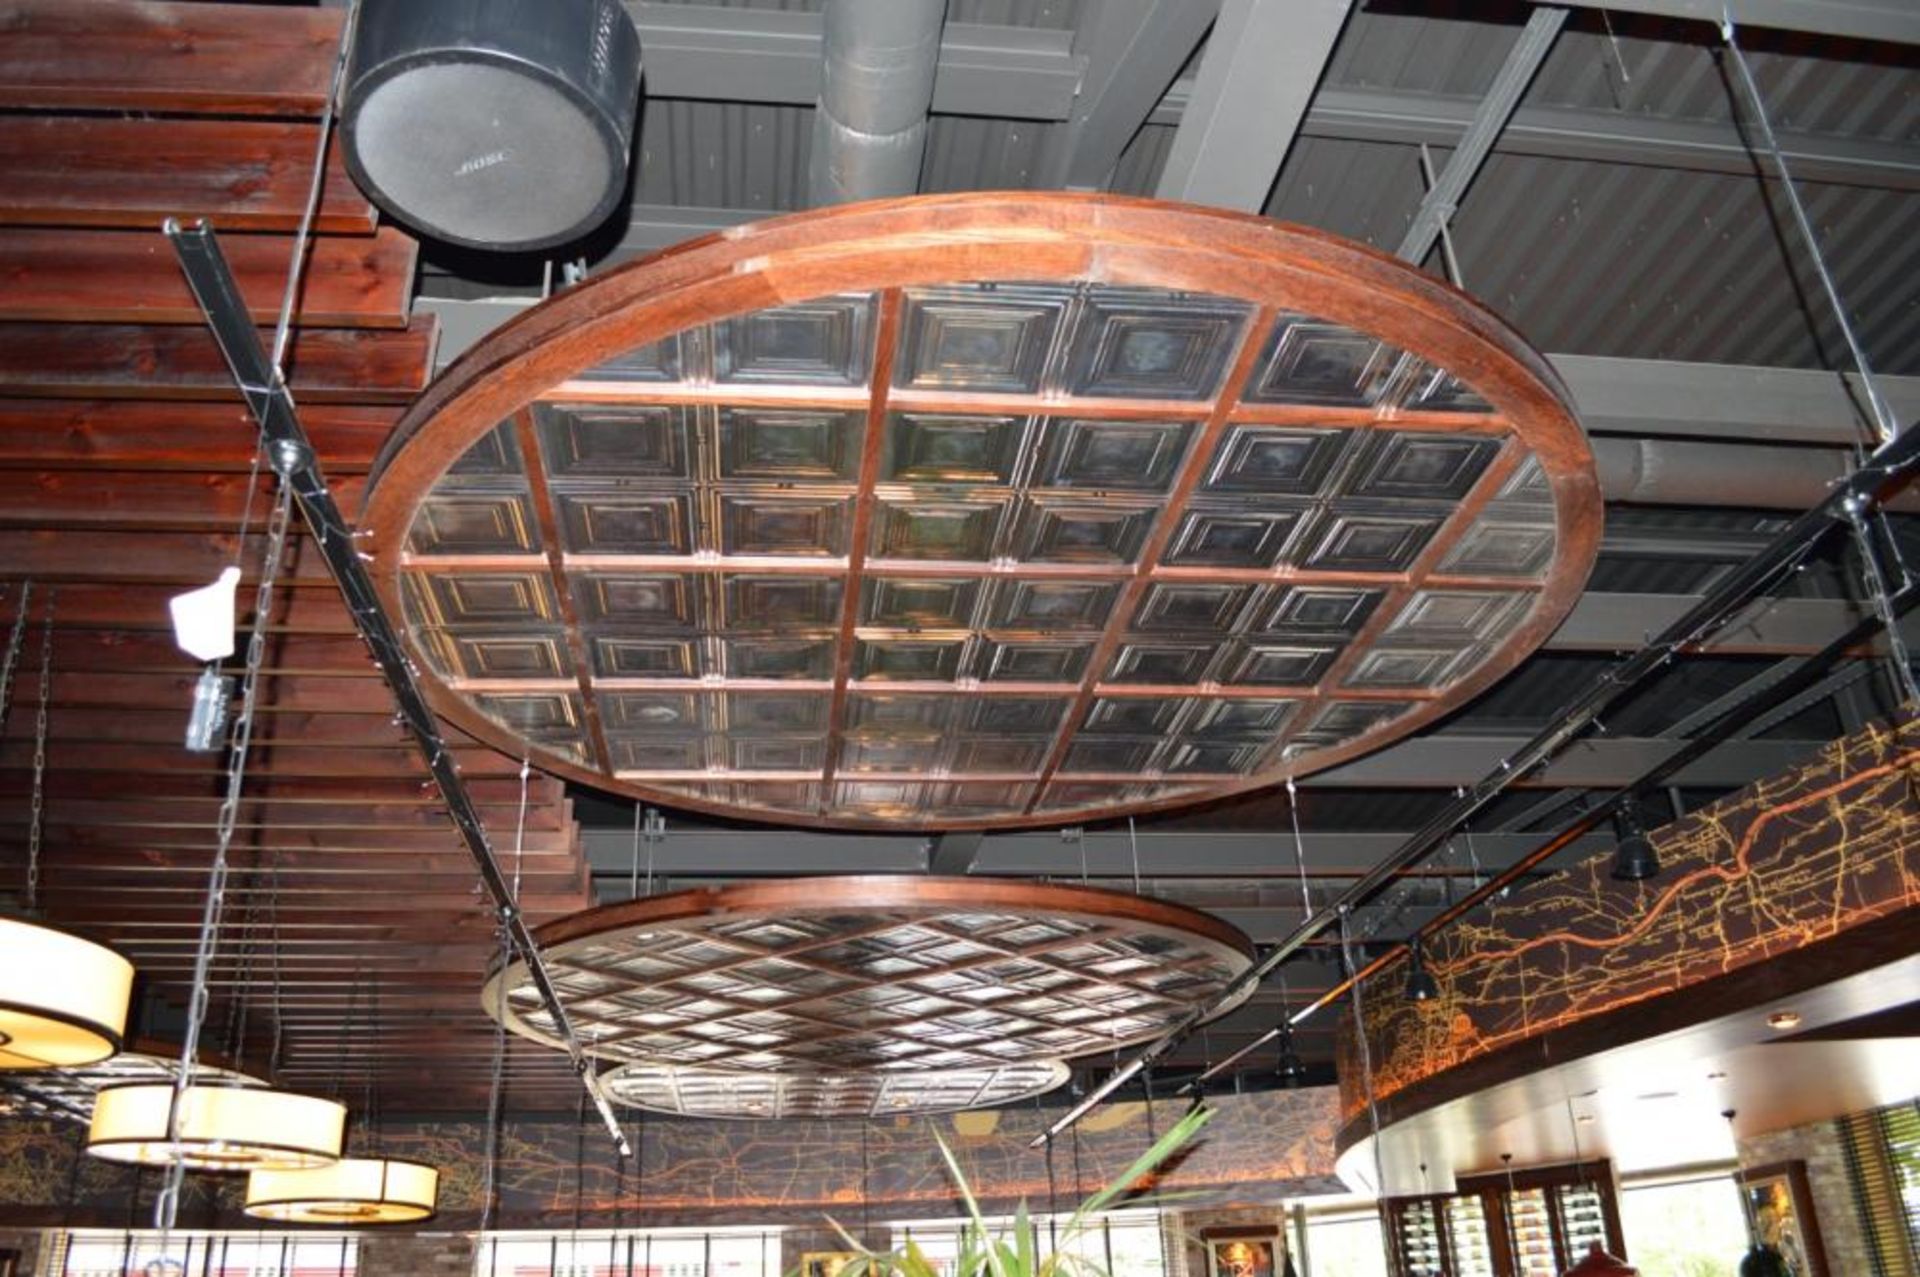 3 x Bespoke Suspended Round Ceiling Panels in Dark Wood With Glass Inserts - Approx 3 Meter Diameter - Image 6 of 6